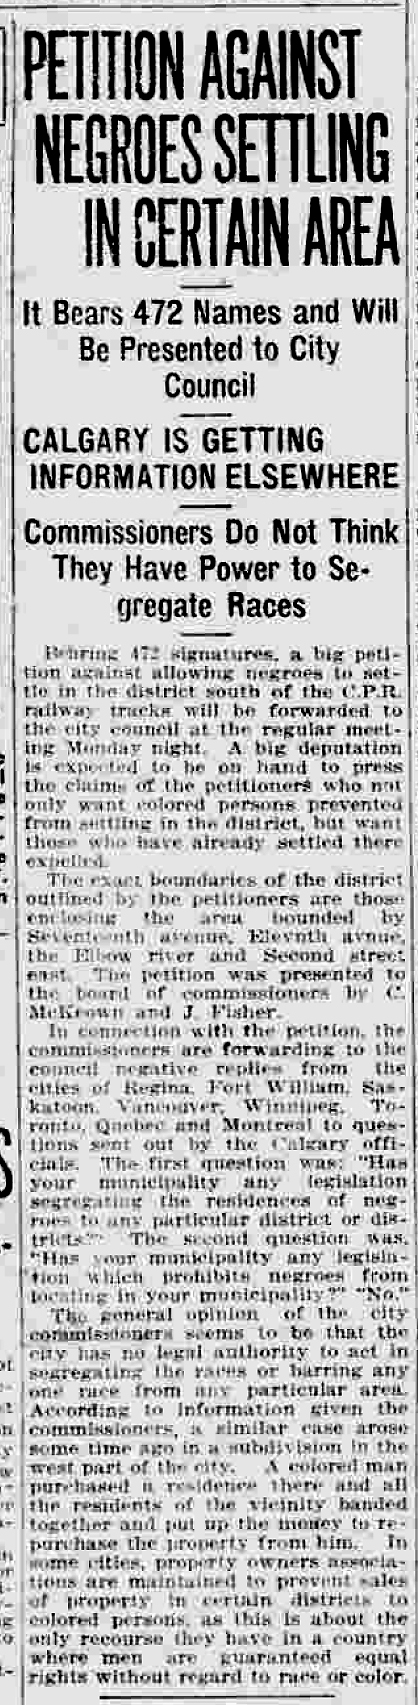 Scan of a newspaper article titled "Petition Against Negroes Settling in Certain Area".